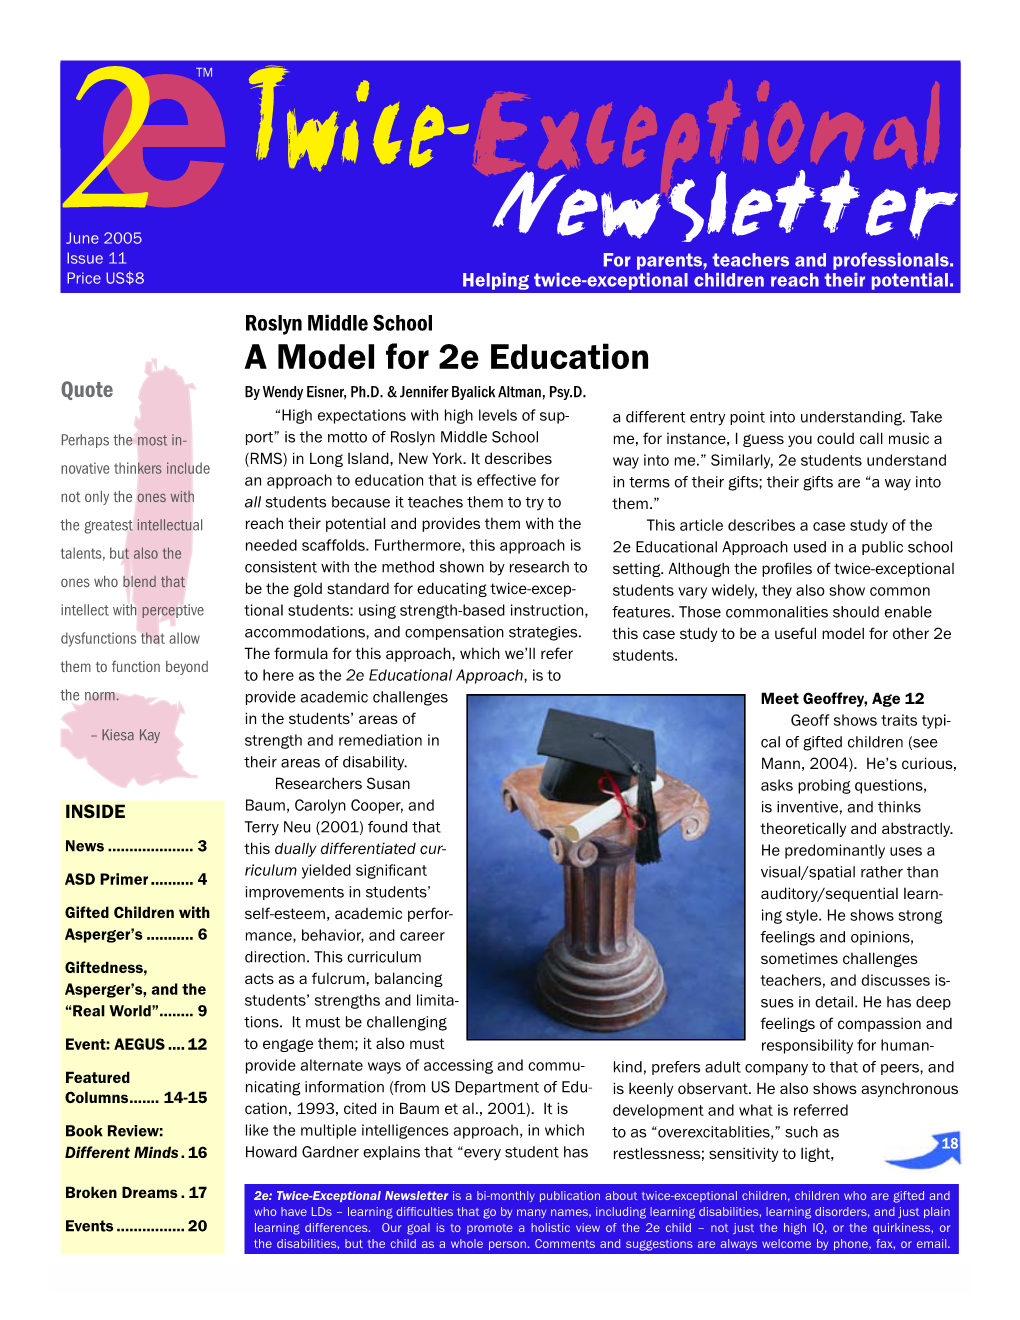 Twice-Exceptionale 2June 2005 Newsletter Issuee 11 for Parents, Teachers and Professionals